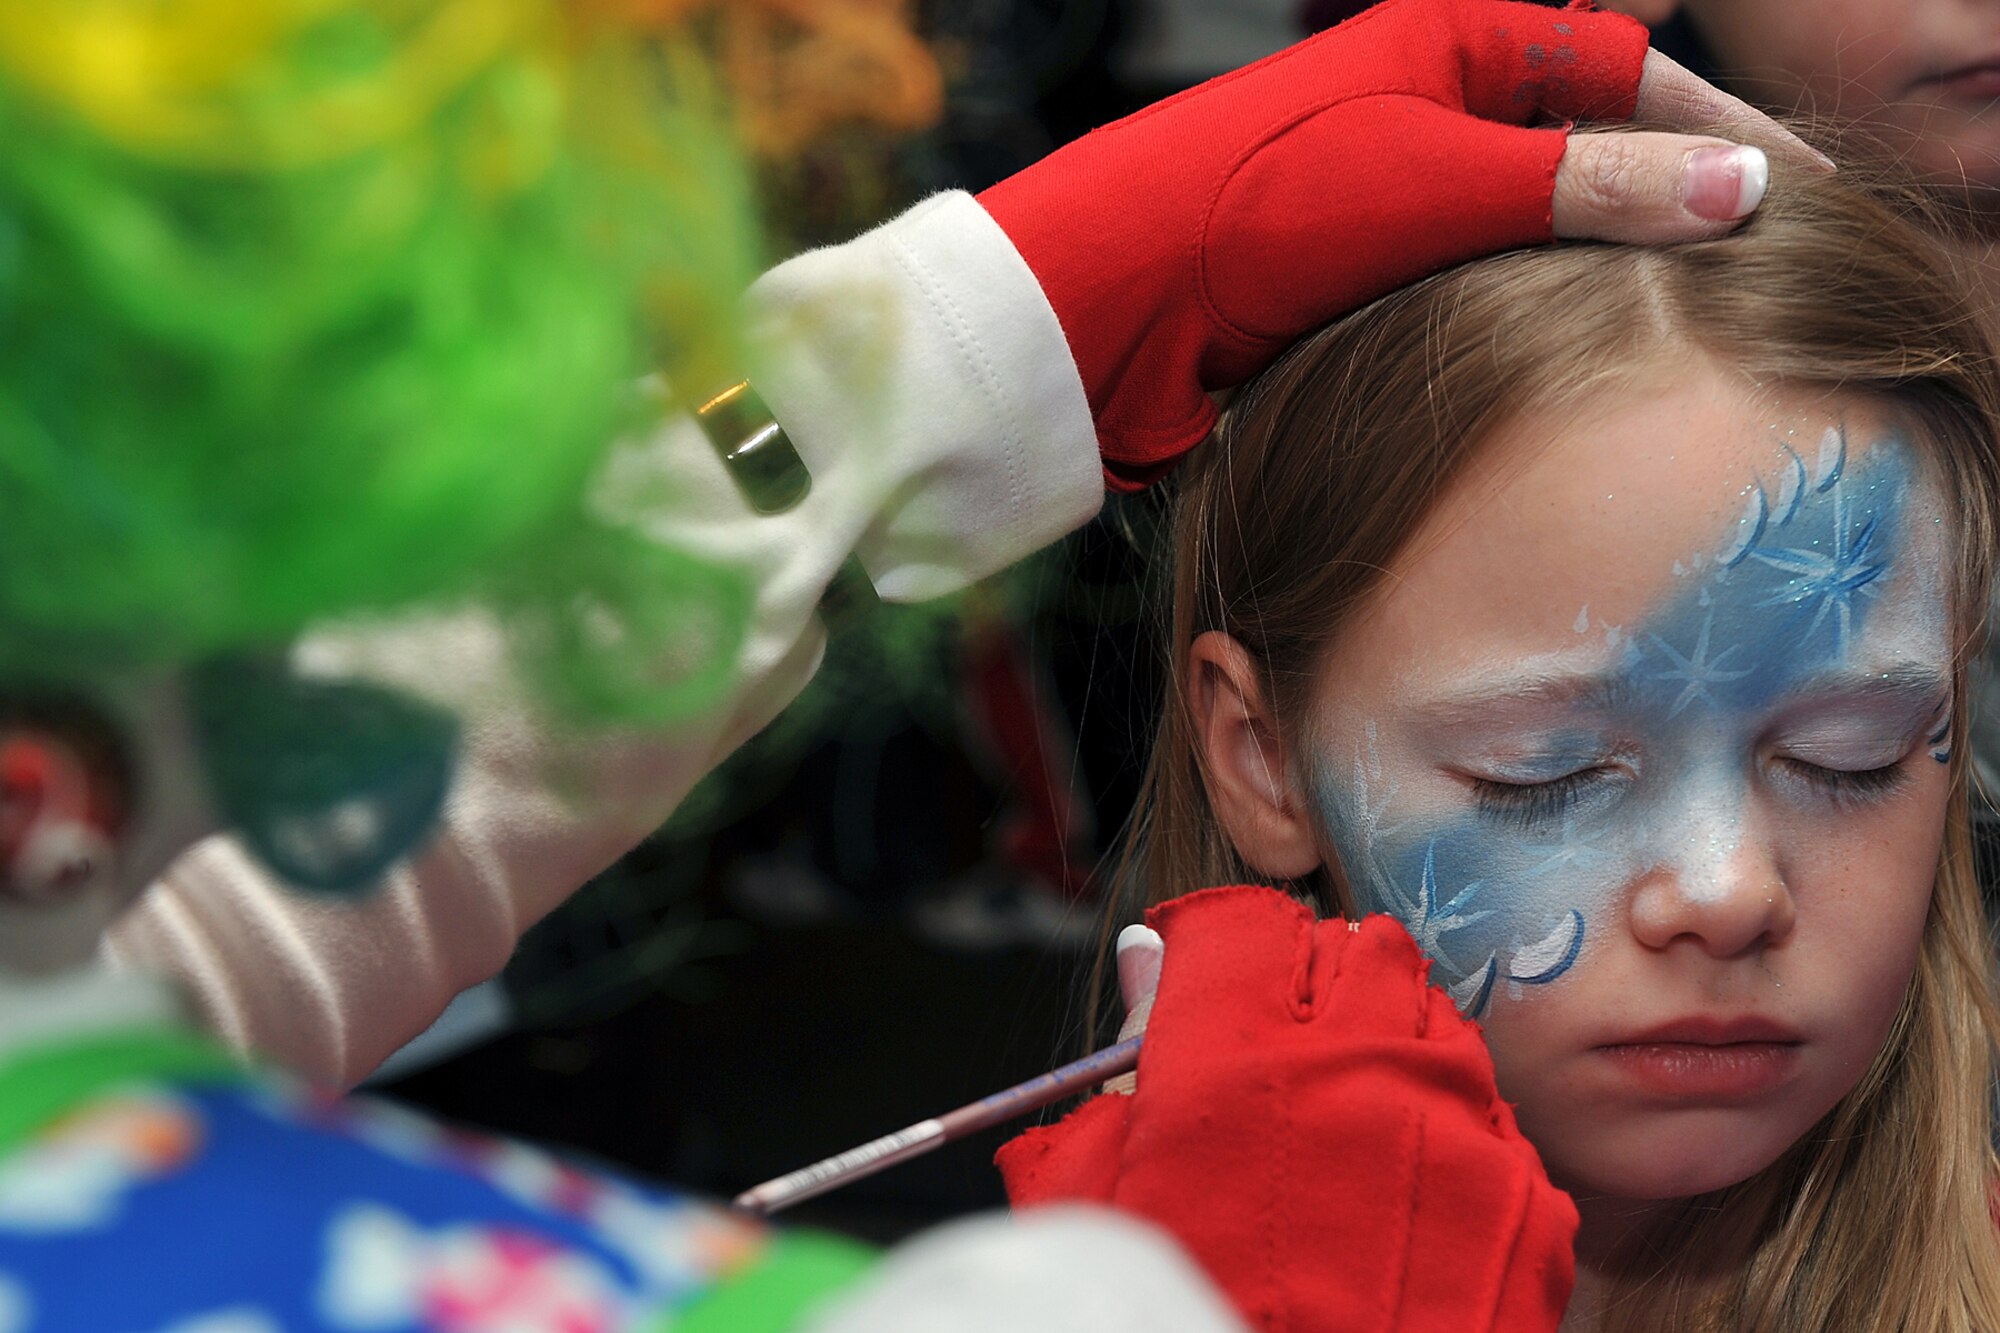 OFFUTT AIR FORCE BASE, Neb. ? Sara Voorhees, daughter of Capt. Corey Voorhees, gets her face painted by Donna Trout, also known as Rainbow Trout the clown, during the tree lighting and holiday events inside the Community Activity Center Dec. 2. This annual event provides Team Offutt member and their families a fun environment to share their joy and give presents to their love ones this Christmas season.  U.S. Air Force Photo by Charles Haymond